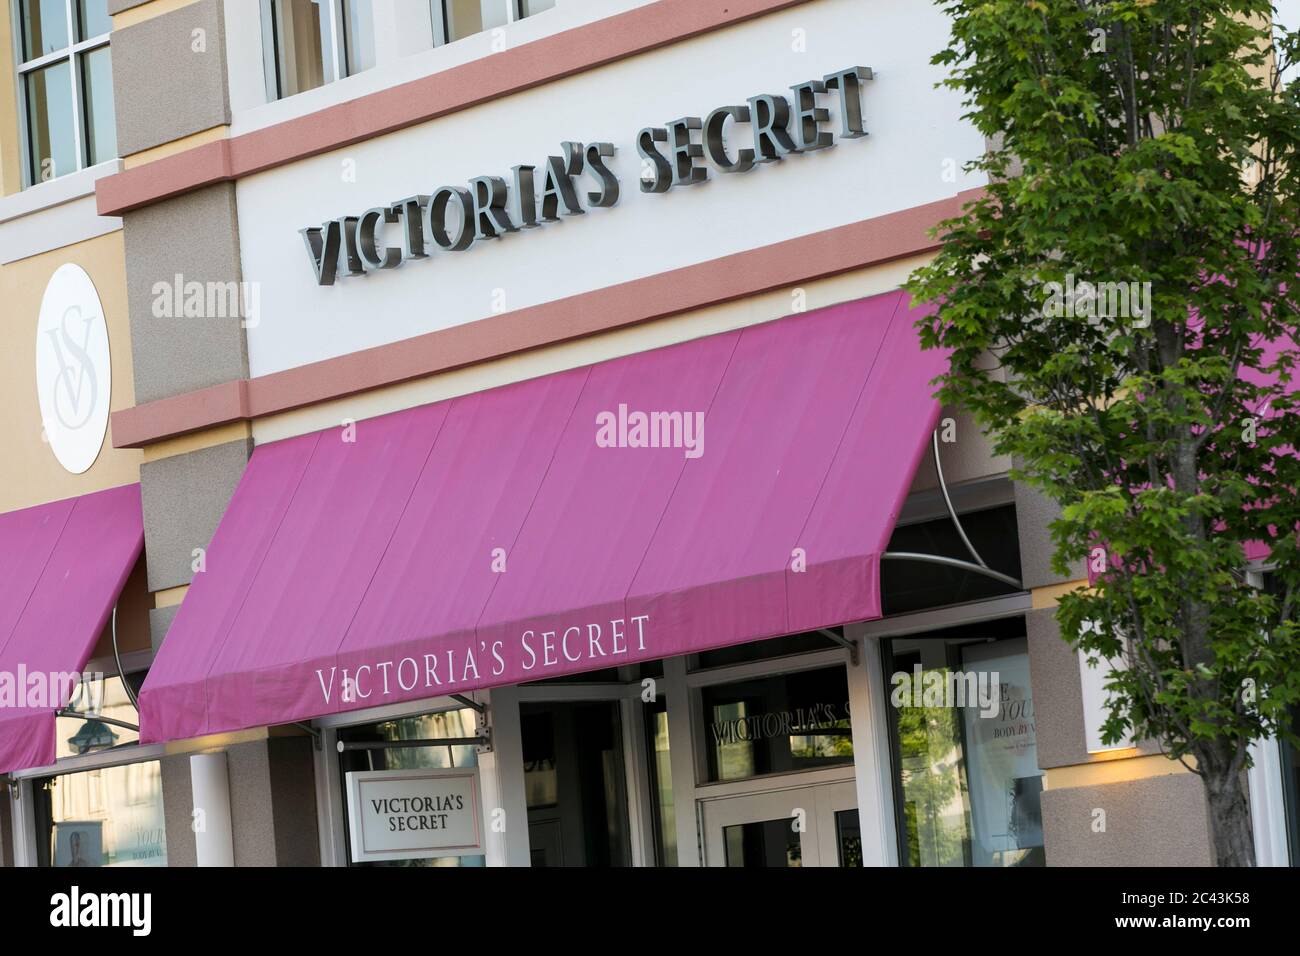 A logo sign outside of a Victoria's Secret retail store location in Bowie, Maryland on June 8, 2020. Stock Photo